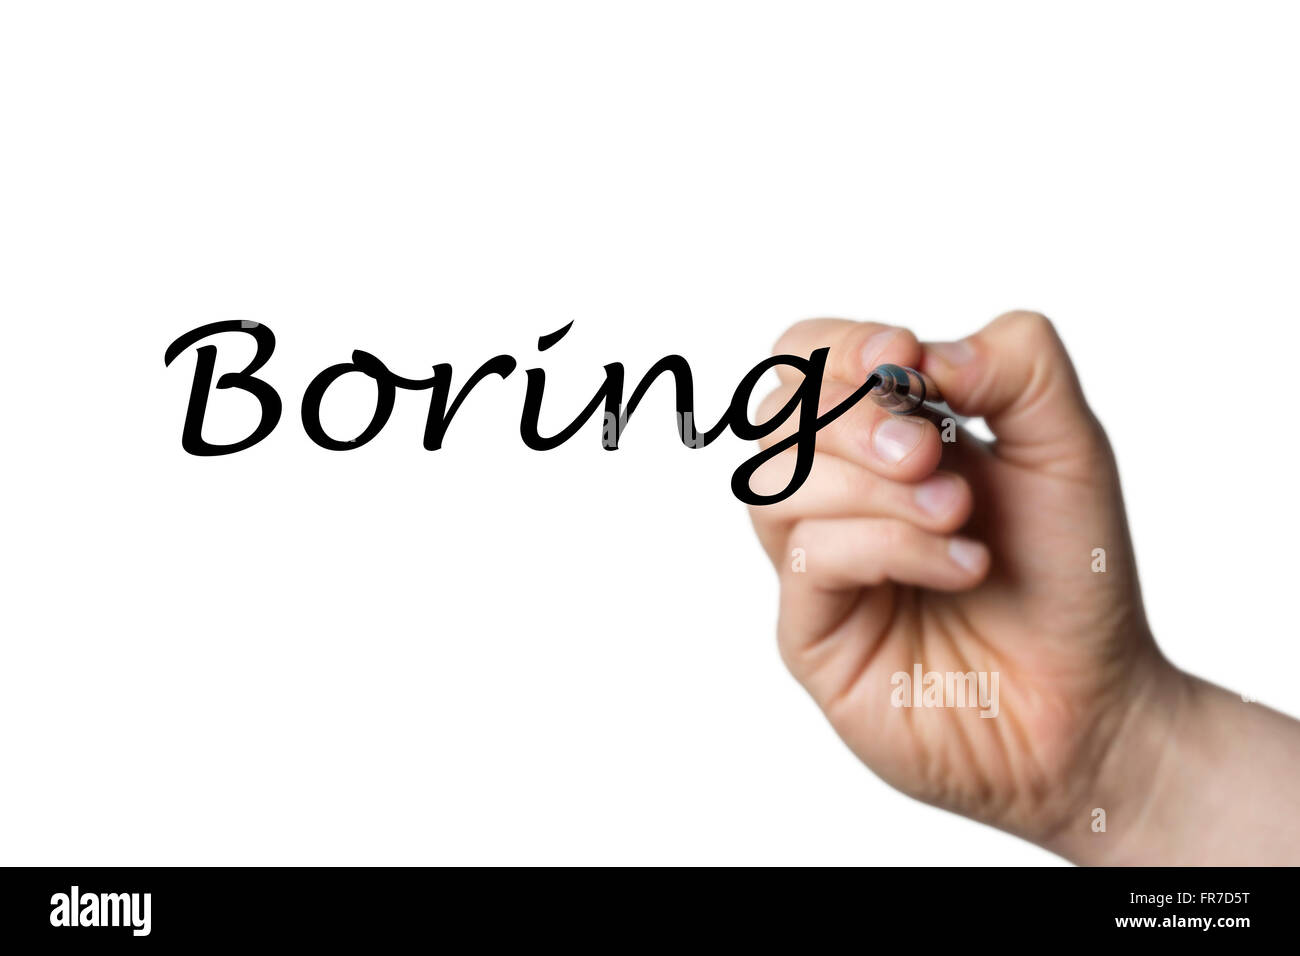 Boring written by a hand isolated on white background Stock Photo